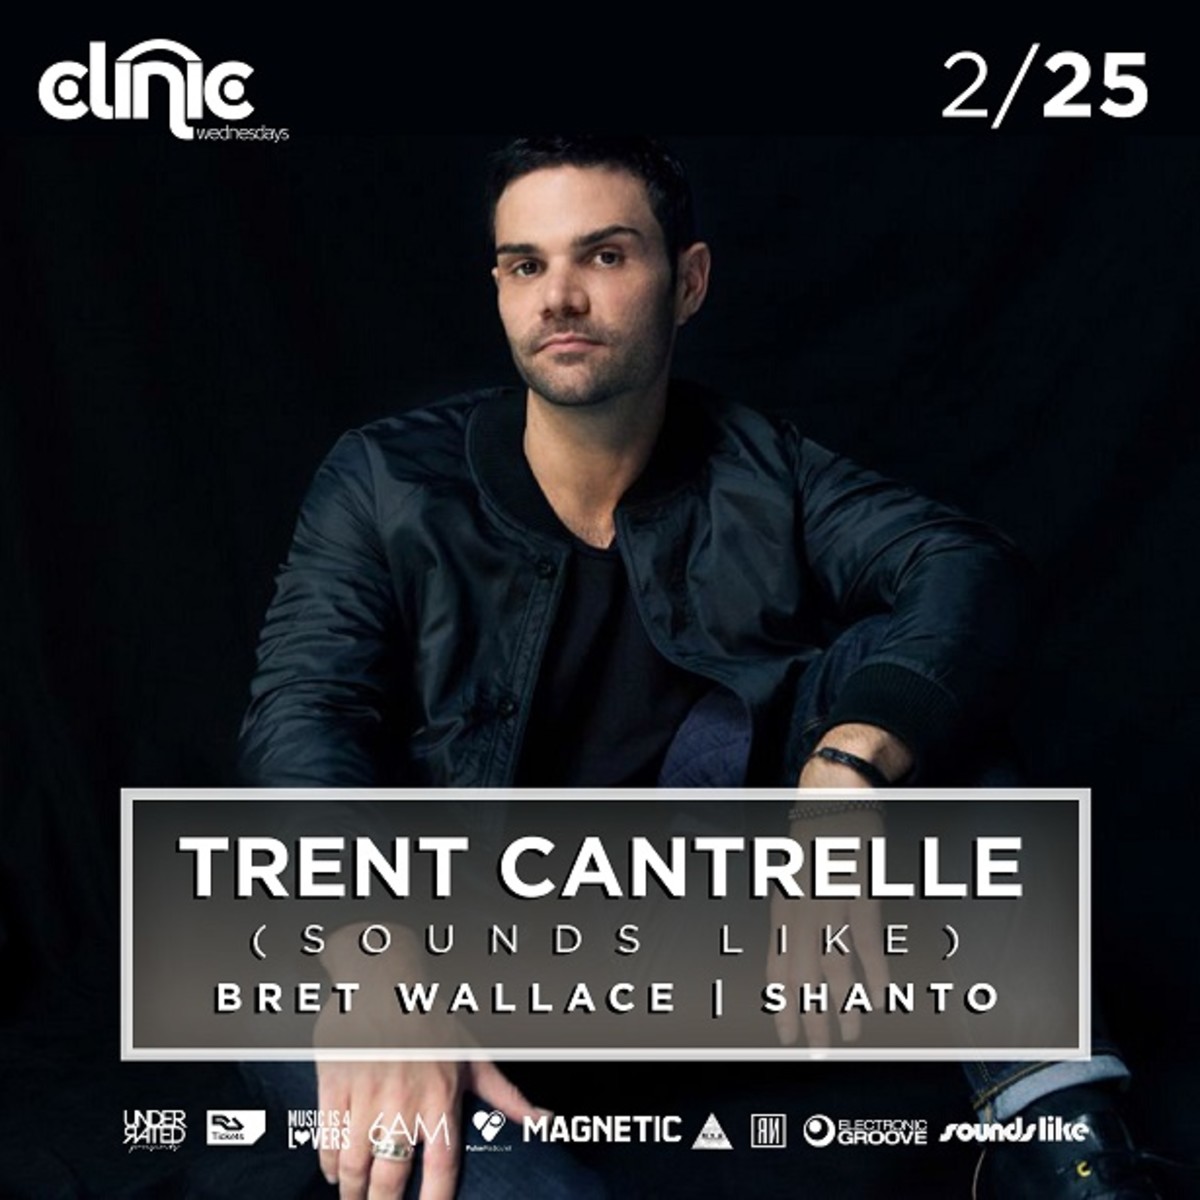 Clinic Wednesdays Tonight with Trent Cantrelle (Sounds Like) - 2.25.15